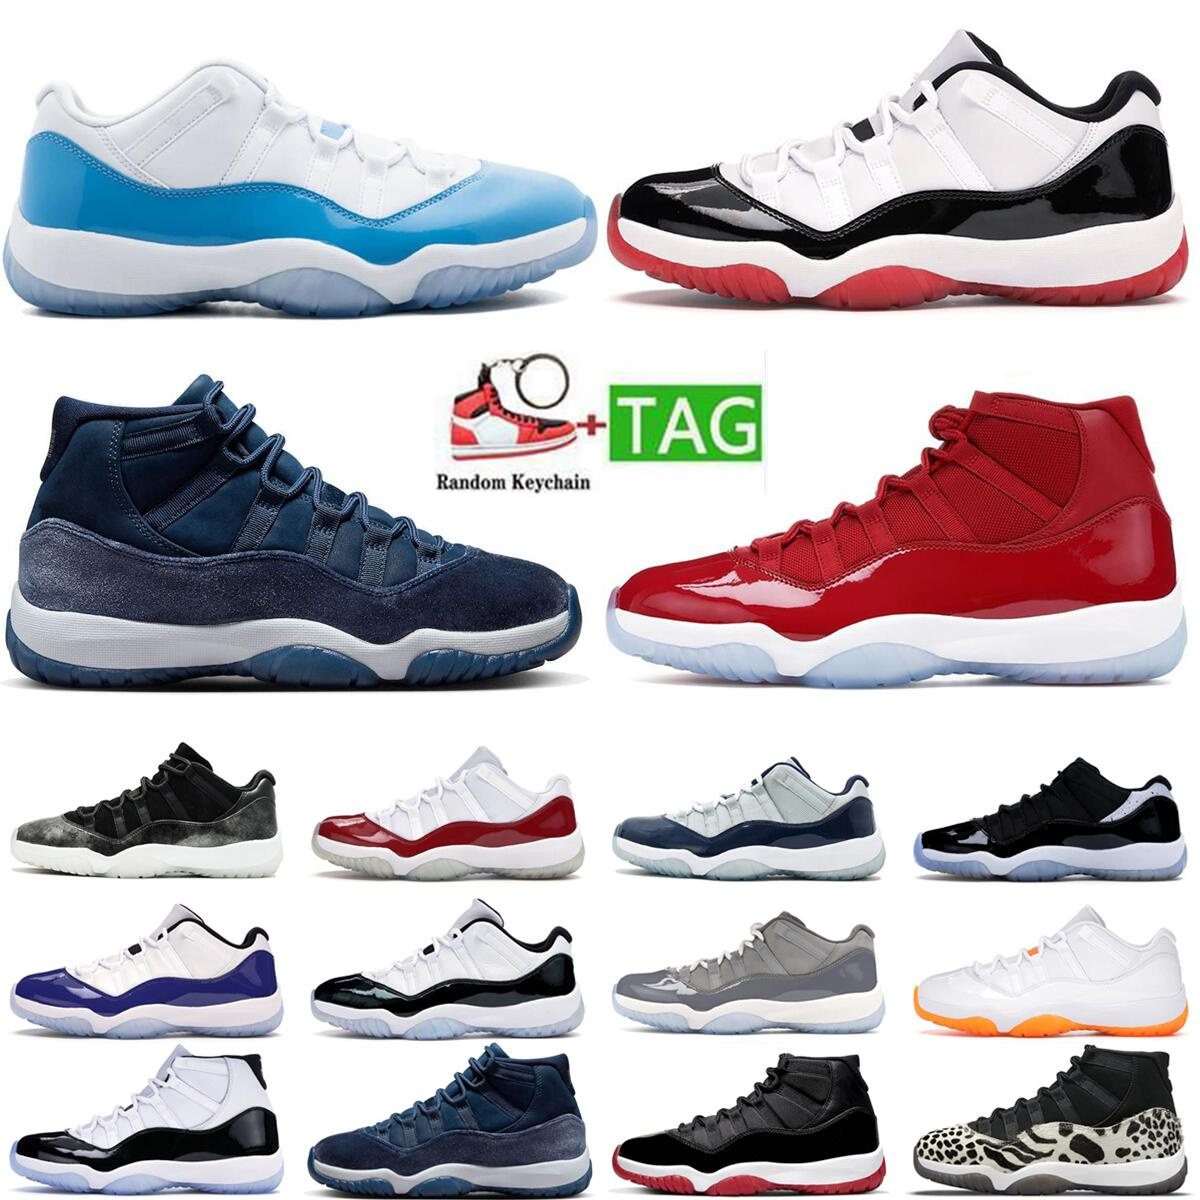 Outdoor Shoes Basketball Shoes Platinum Tint women men Cap and Gown sneakers Concord Blue sports trainers size eur 36-47